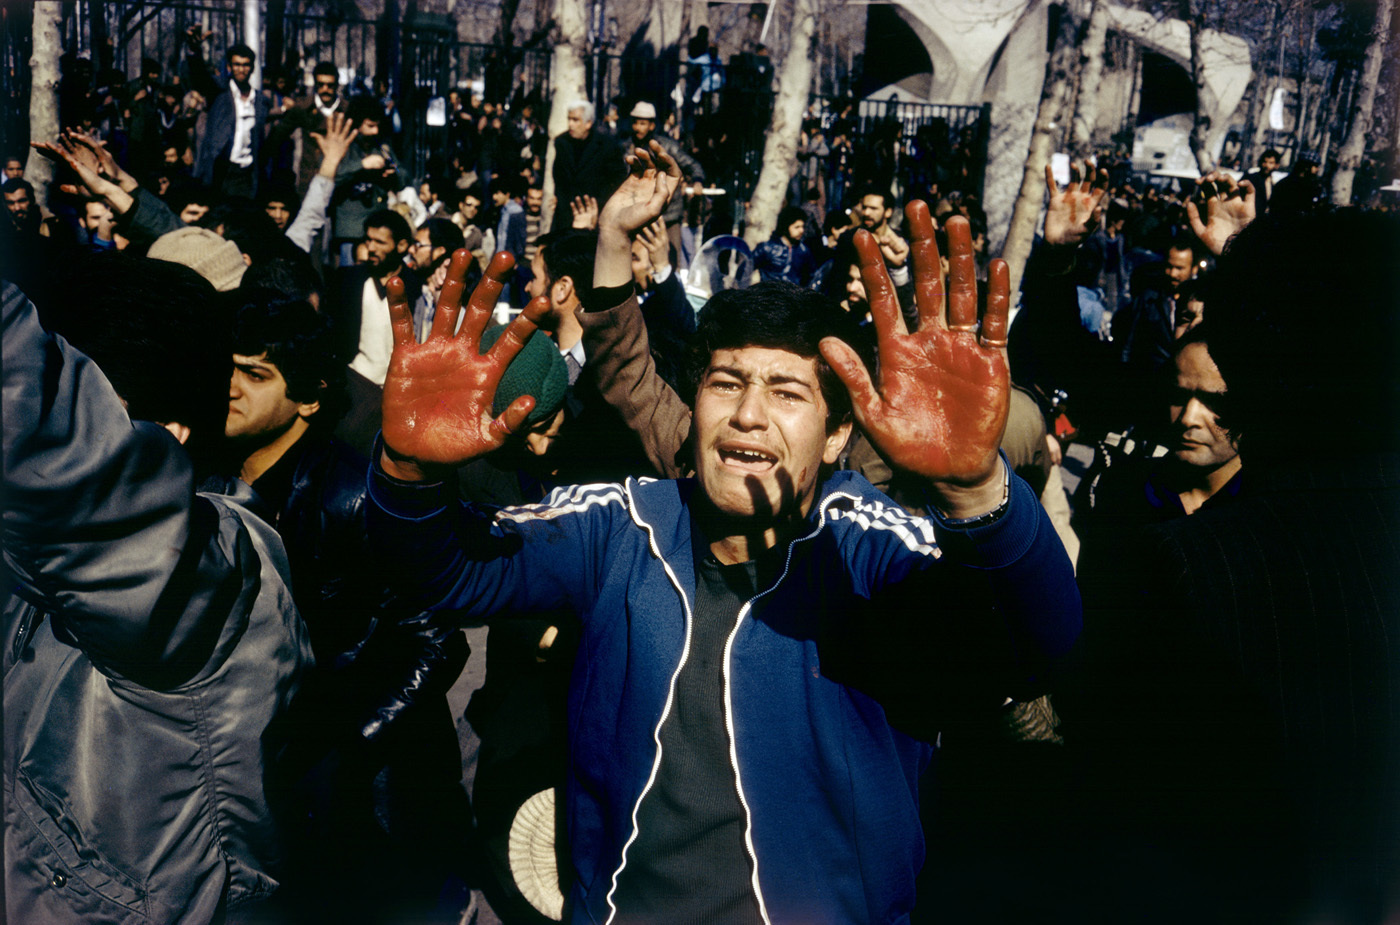 The day before Khomeini's return, a calm sunny day turned tragic when a student was shot by one of the Shah's palace guard. : 44 Days: the Iranian Revolution : David Burnett | Photographer